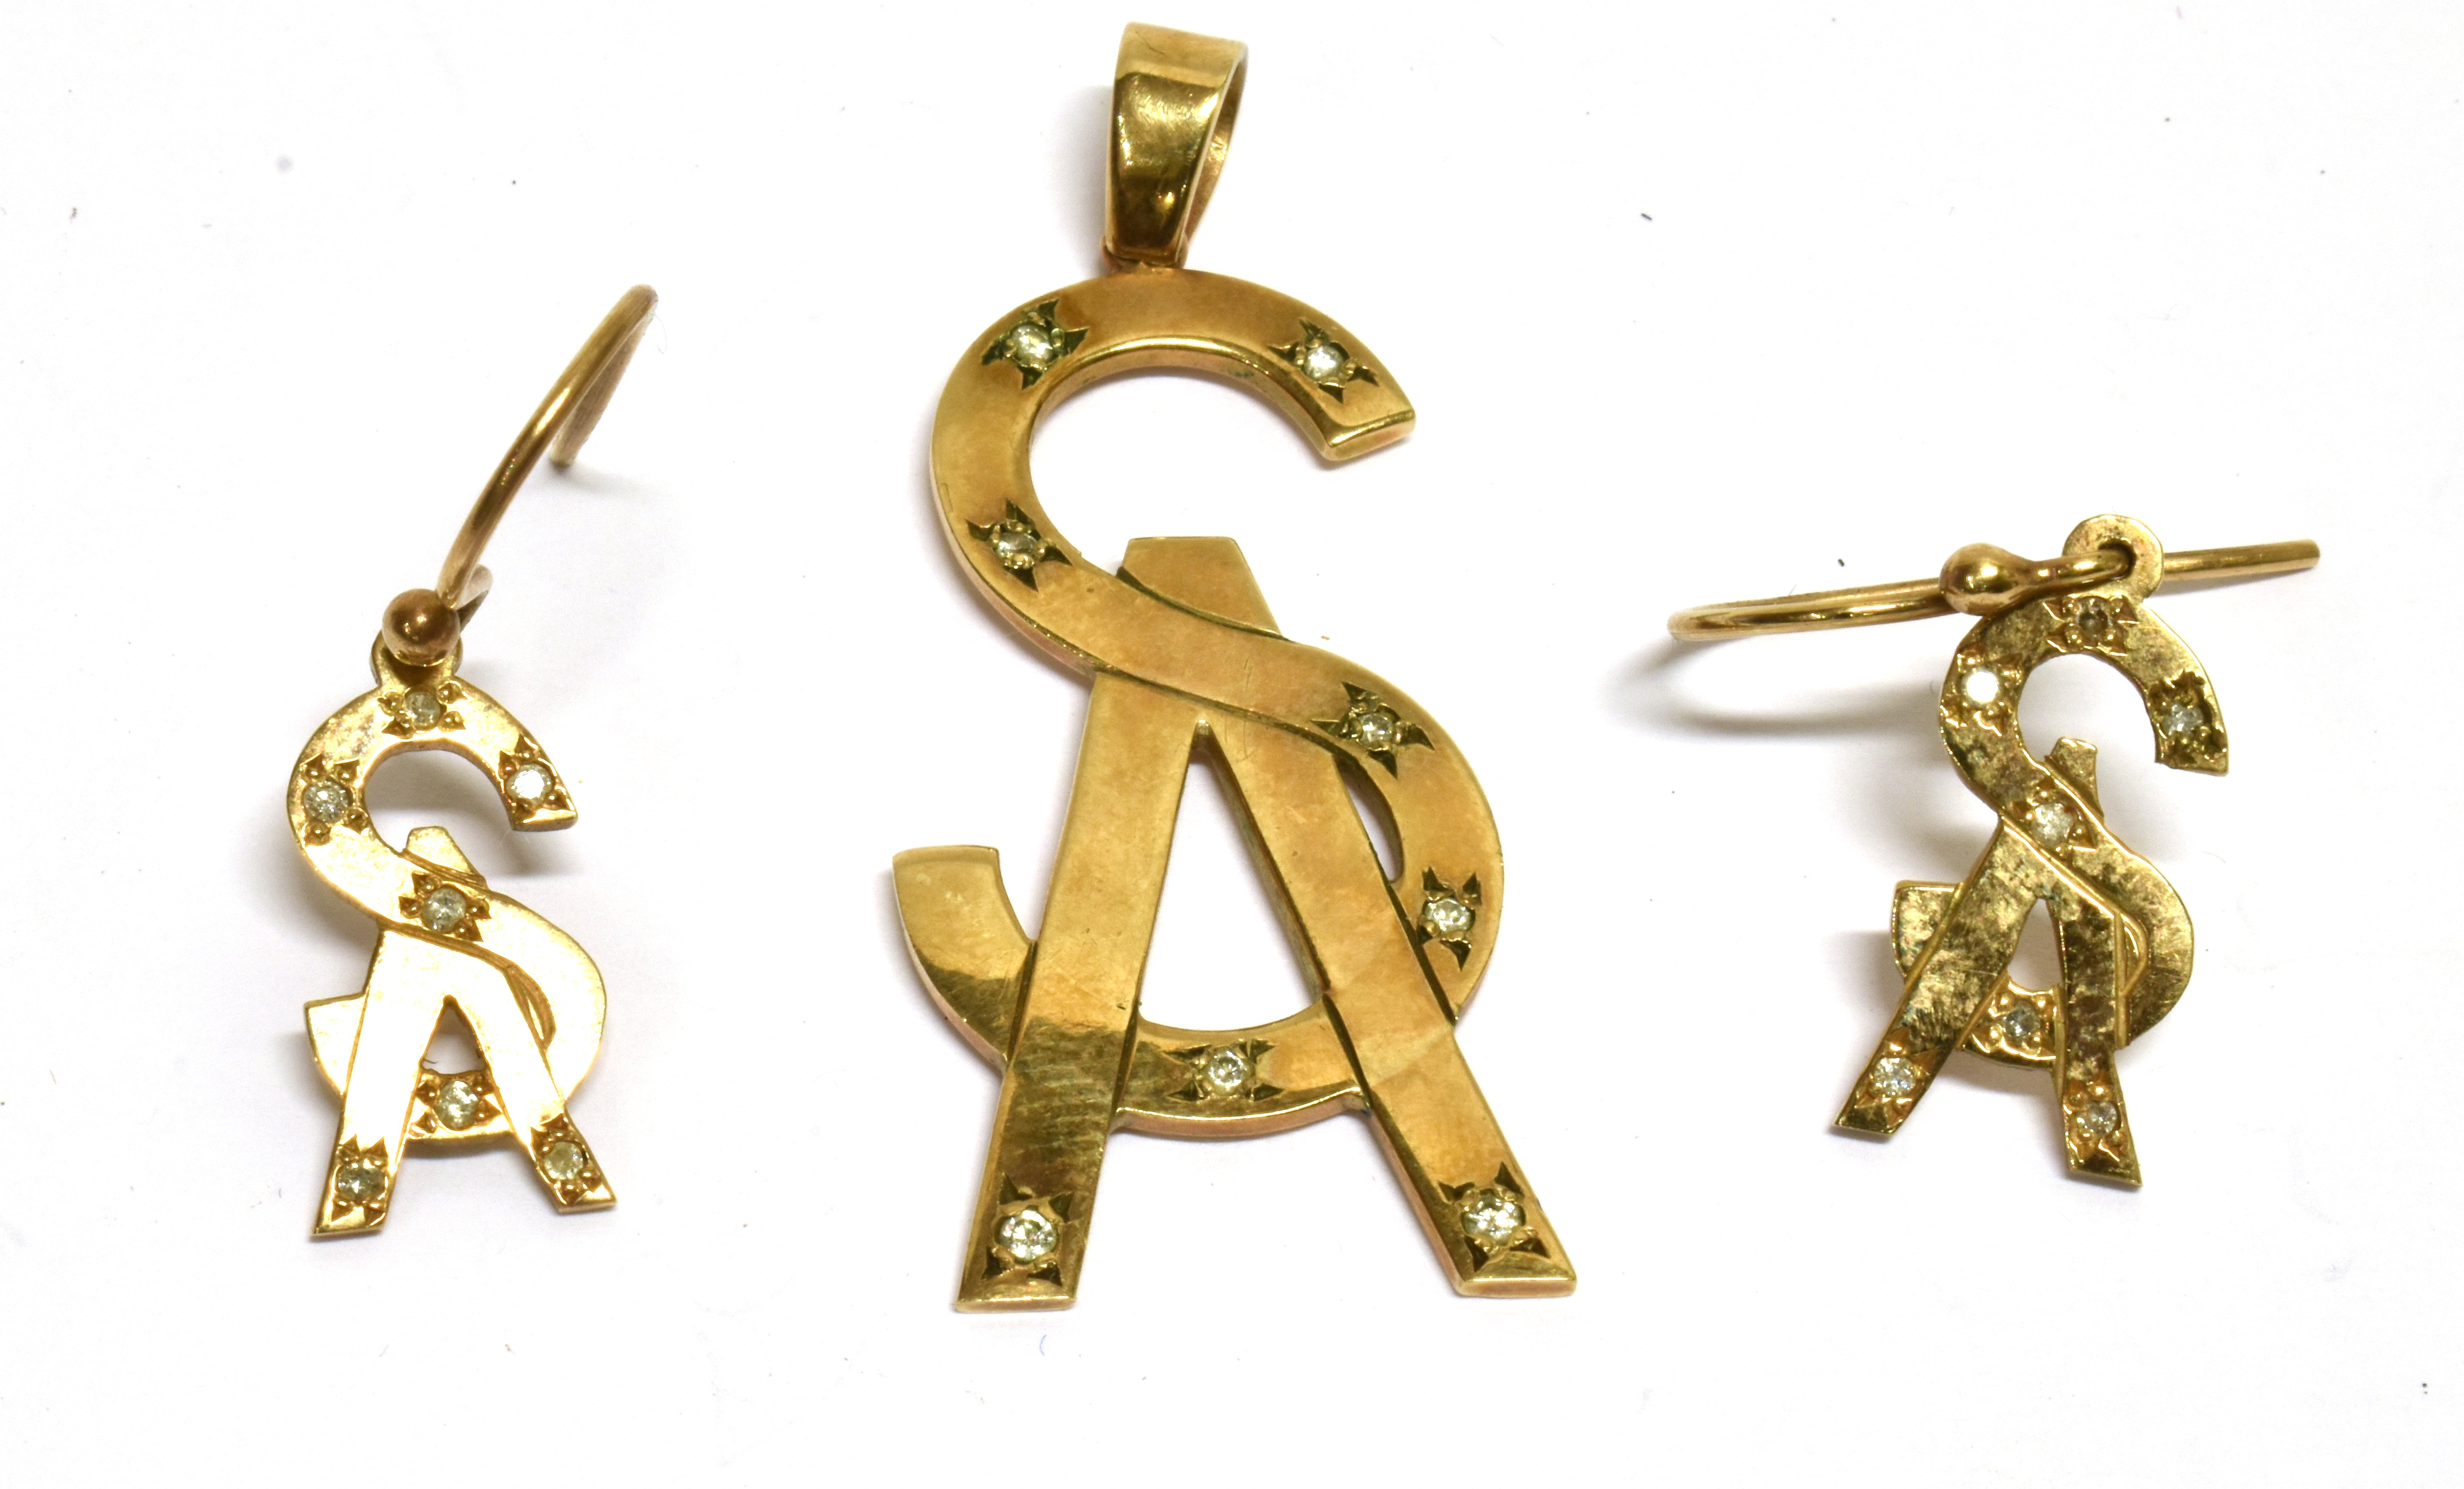 A PAIR OF DIAMOND PENDENT EARRINGS AND A MATCHING PENDANT EACH IN THE FORM OF INITIALS 'SA' and